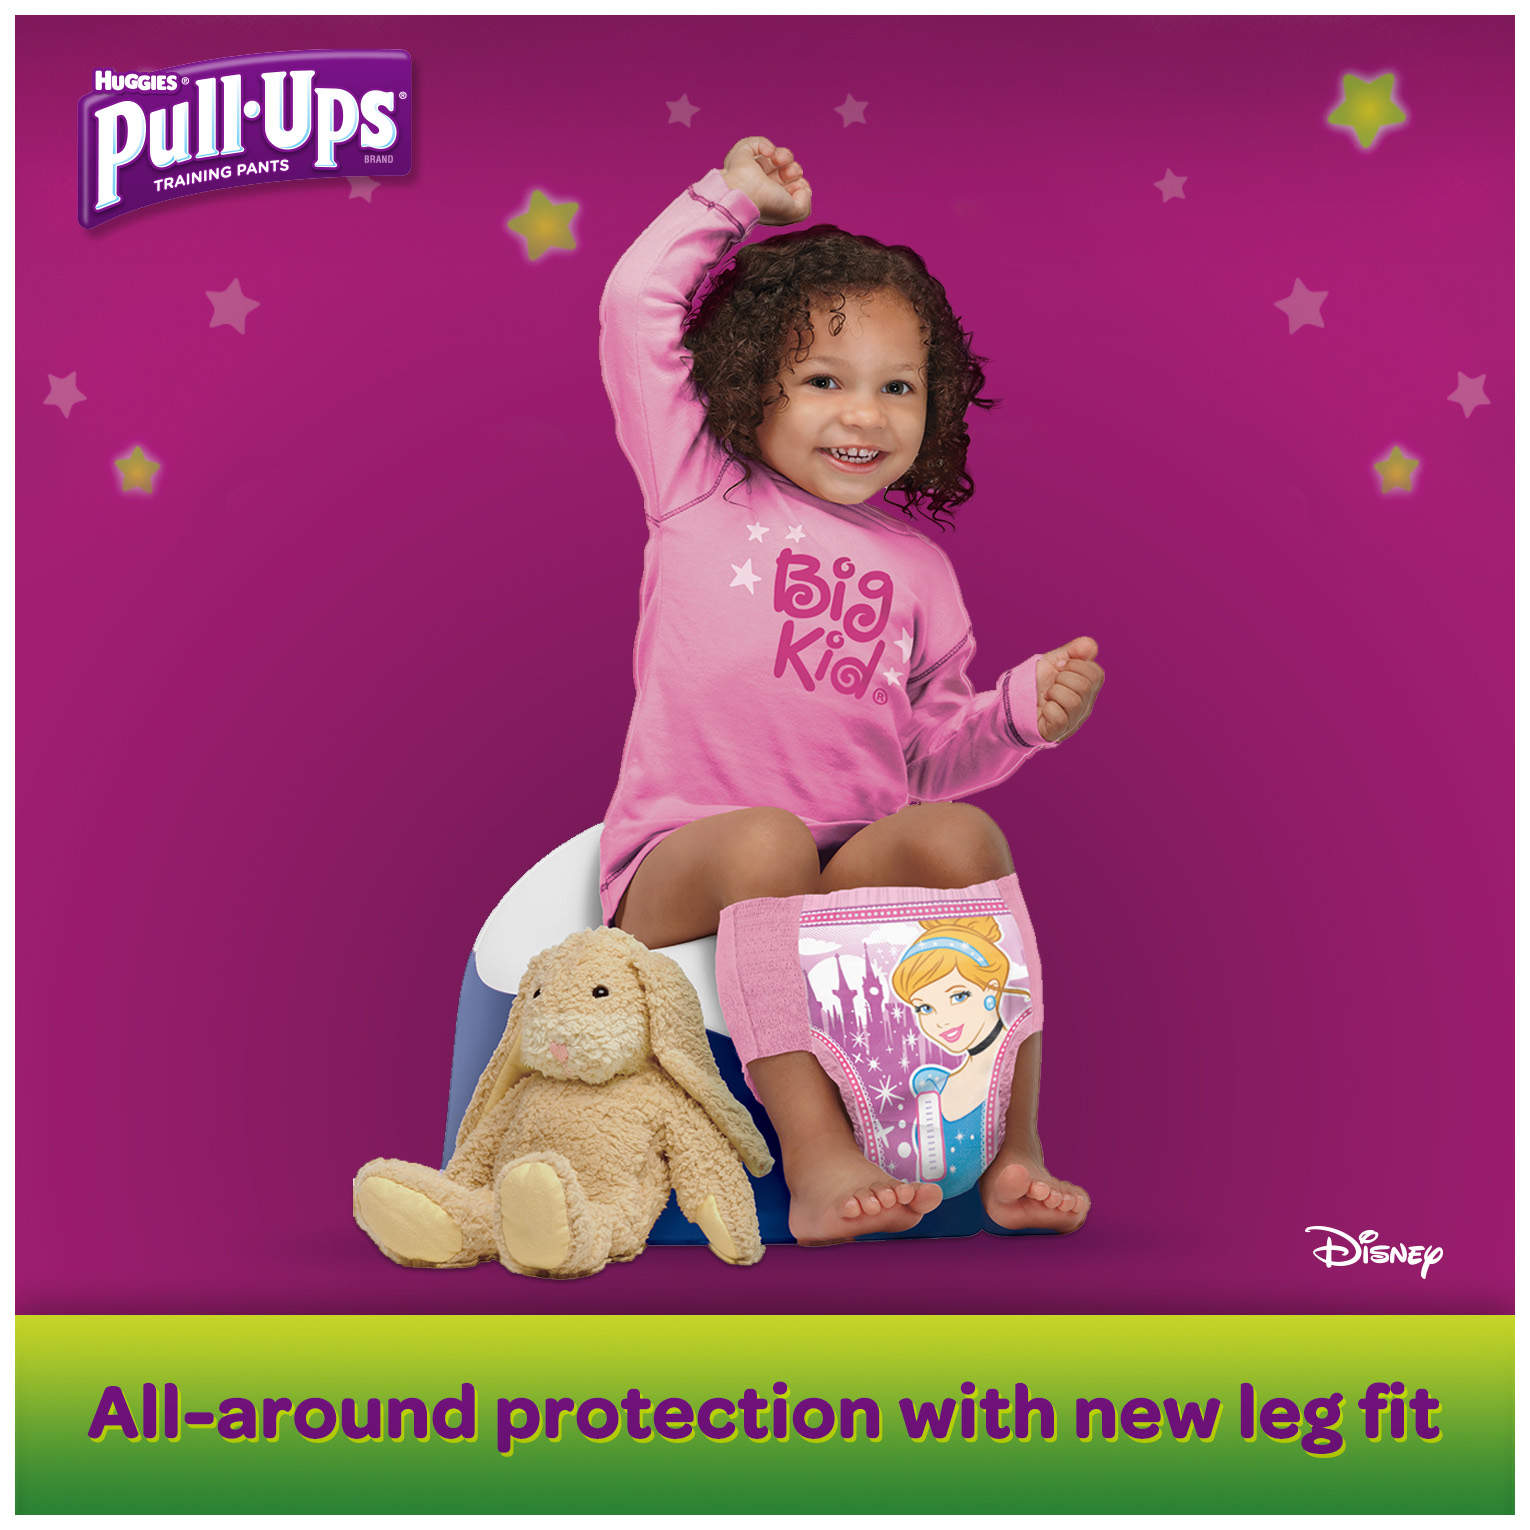 Pull-Ups Girls' Night-Time Training Pants, Size 2T-3T, 50 Count - image 3 of 7